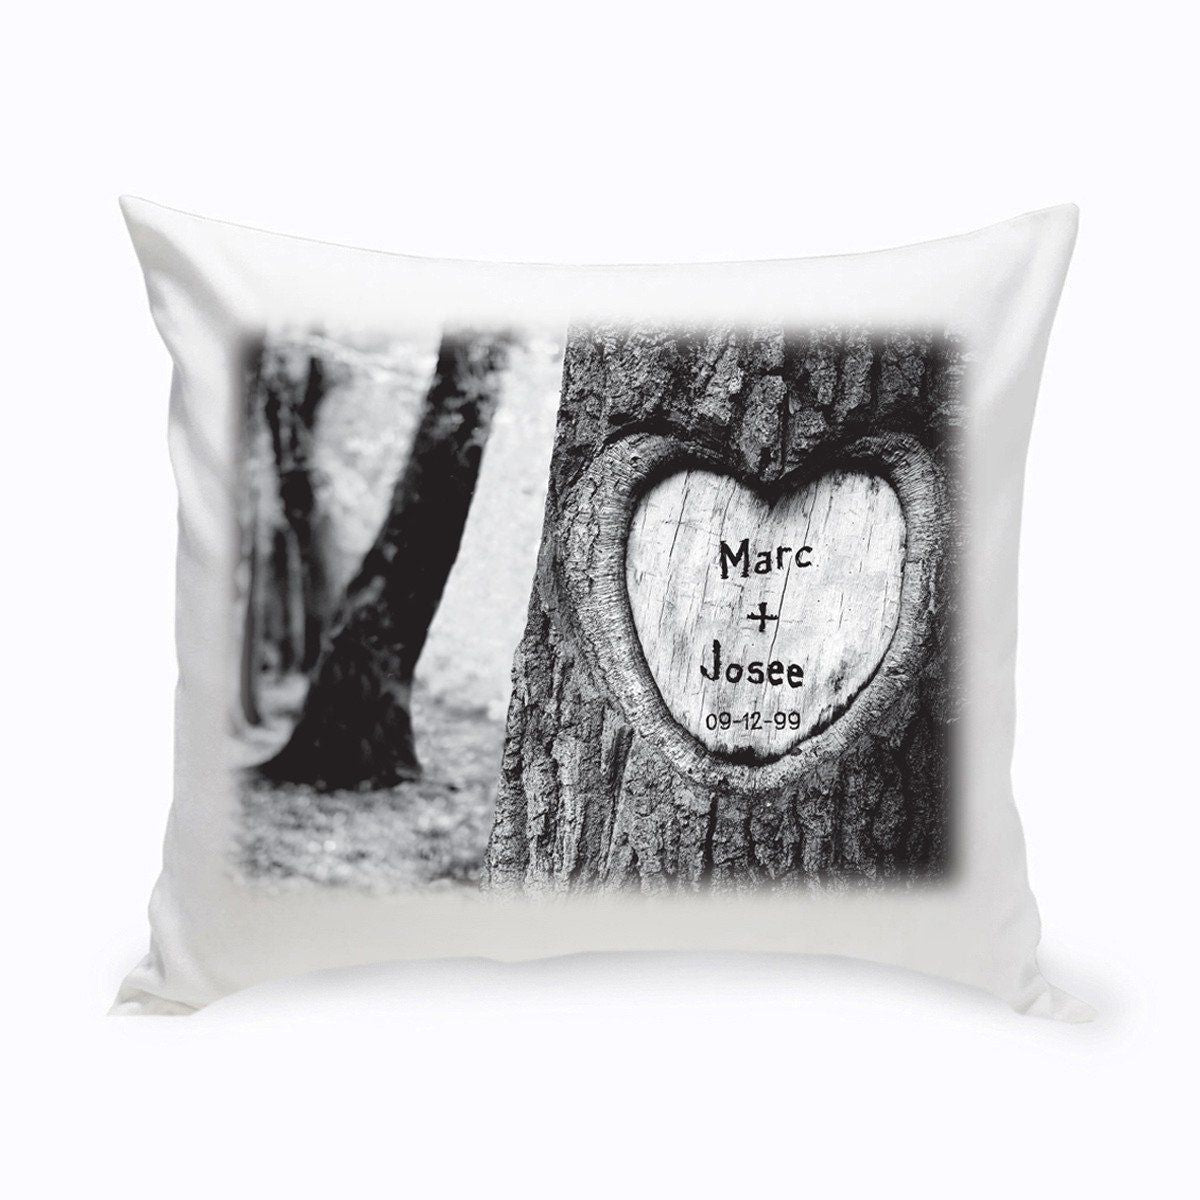 Personalized Everlasting Love Tree Carving Throw Pillow